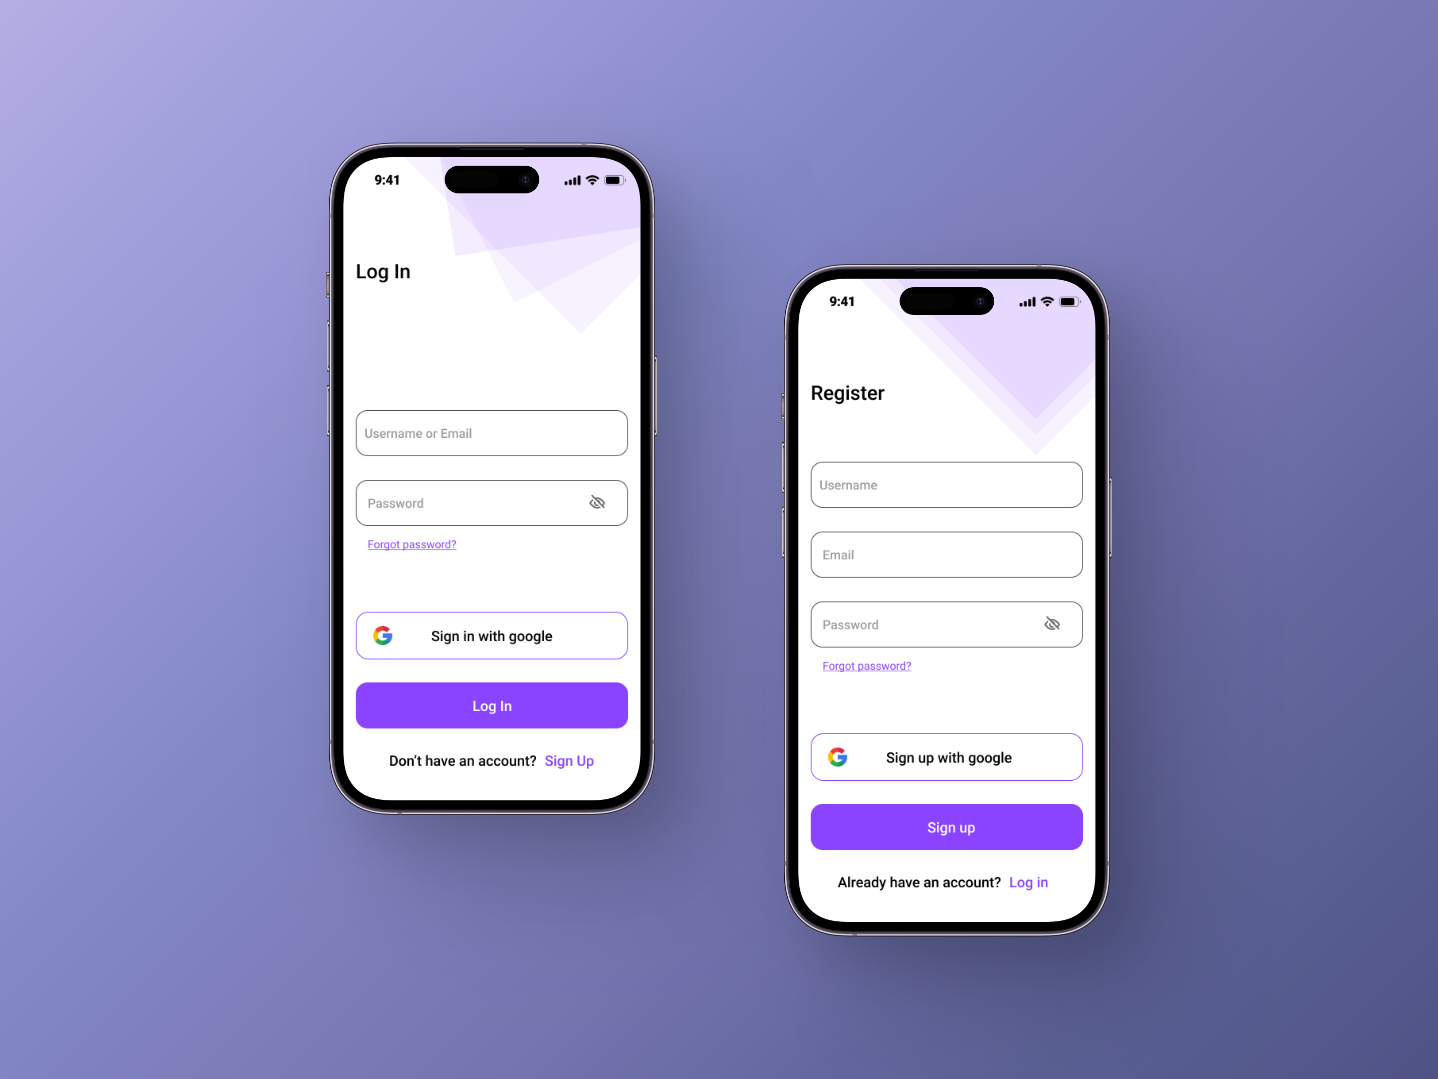 Sign Up/ In by Upnishad Pandya on Dribbble